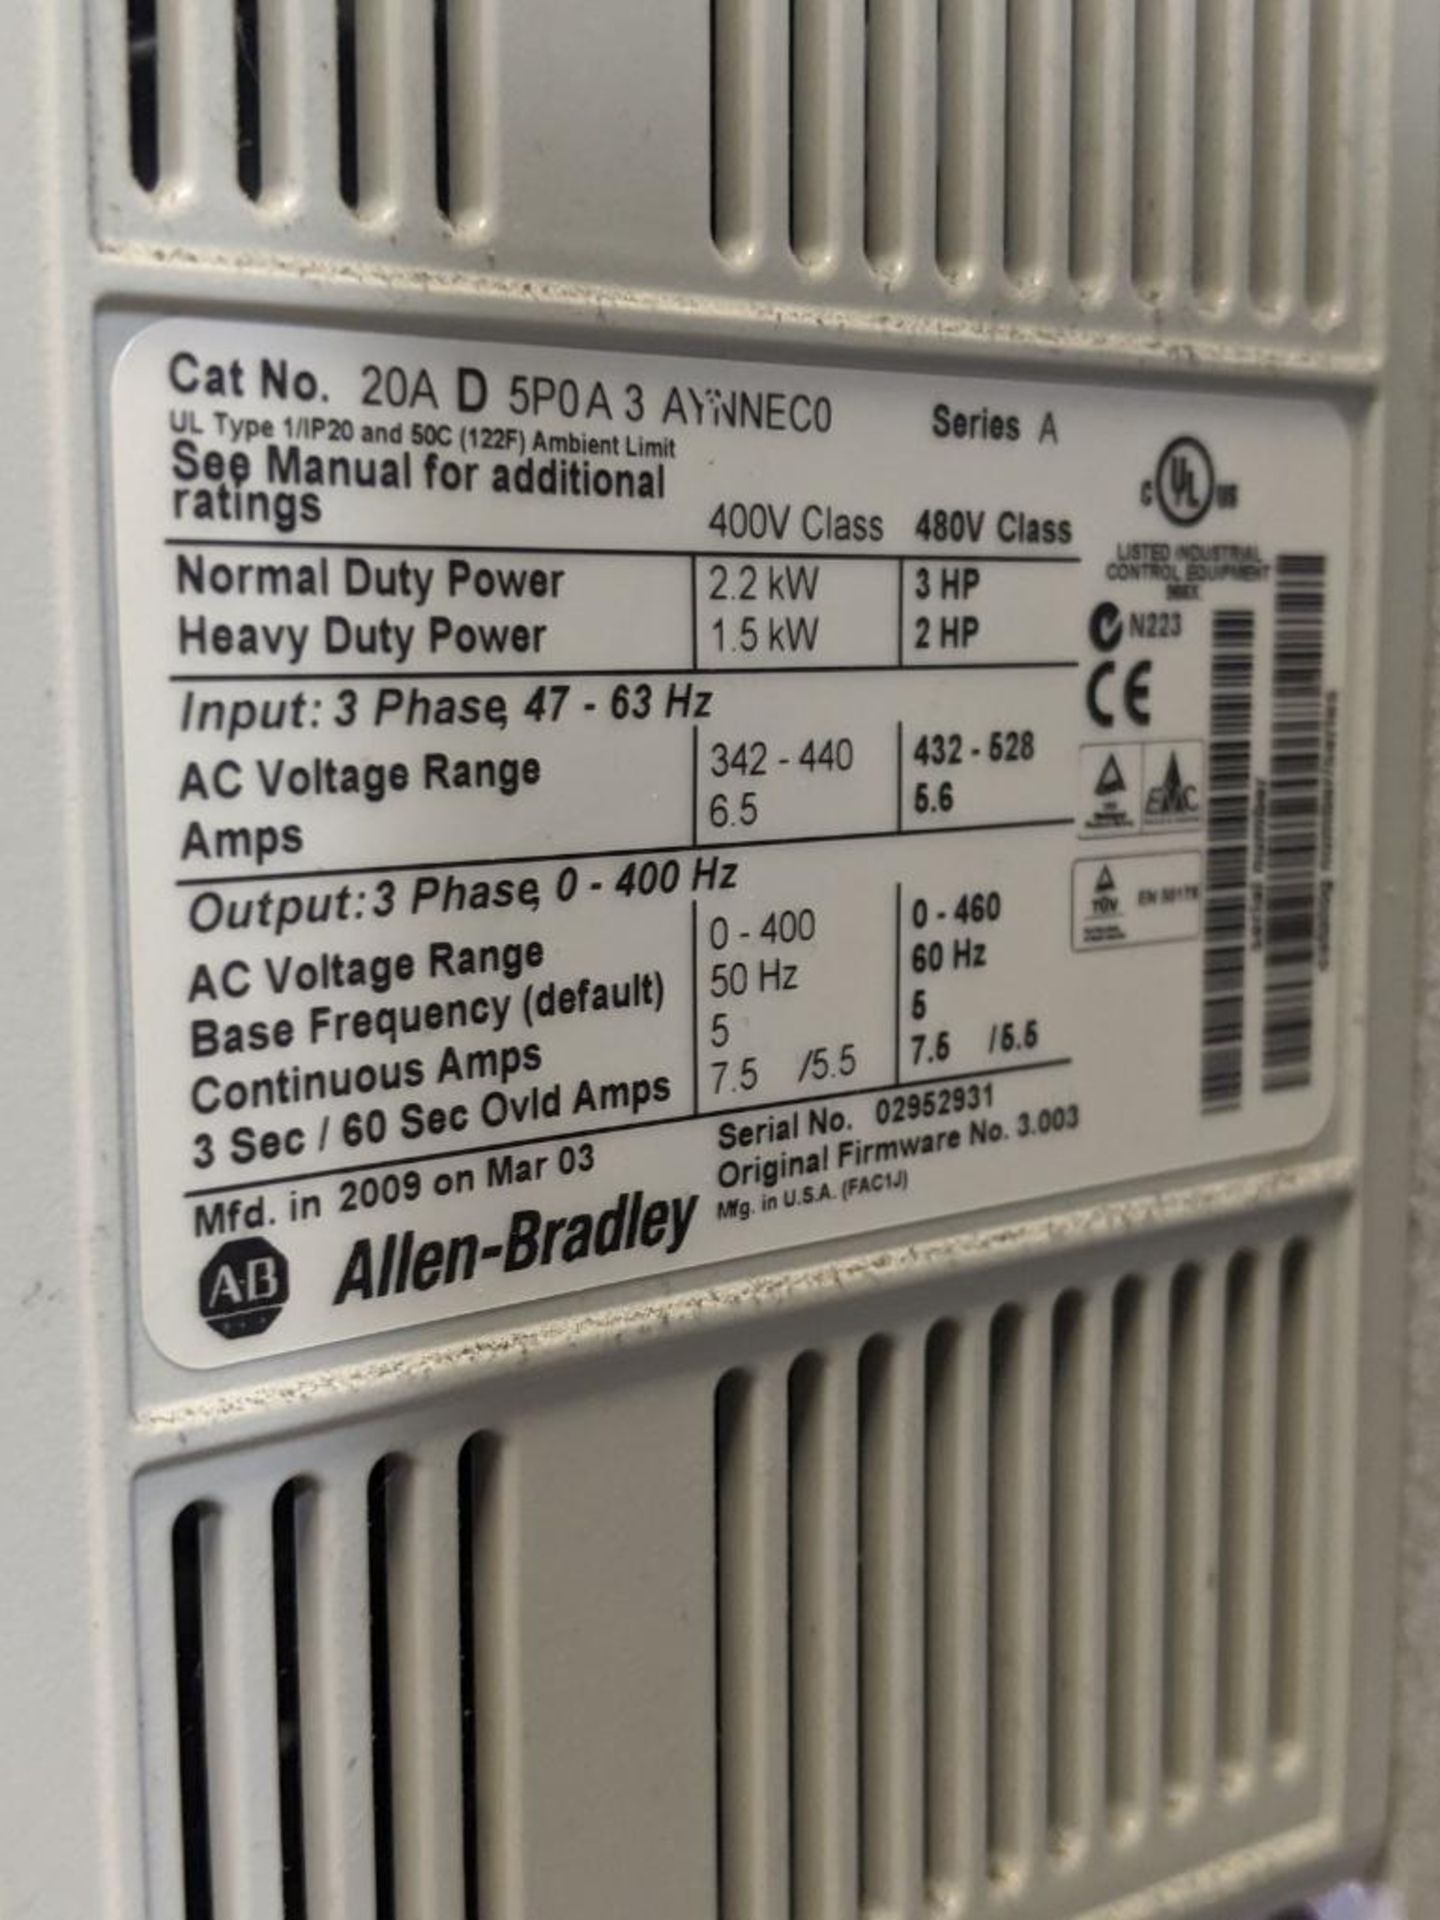 Allen-Bradley PowerFlex 70 Cat No. 20AD5P0A3AYNNEC0 3HP Variable Frequency Drive - Image 3 of 4